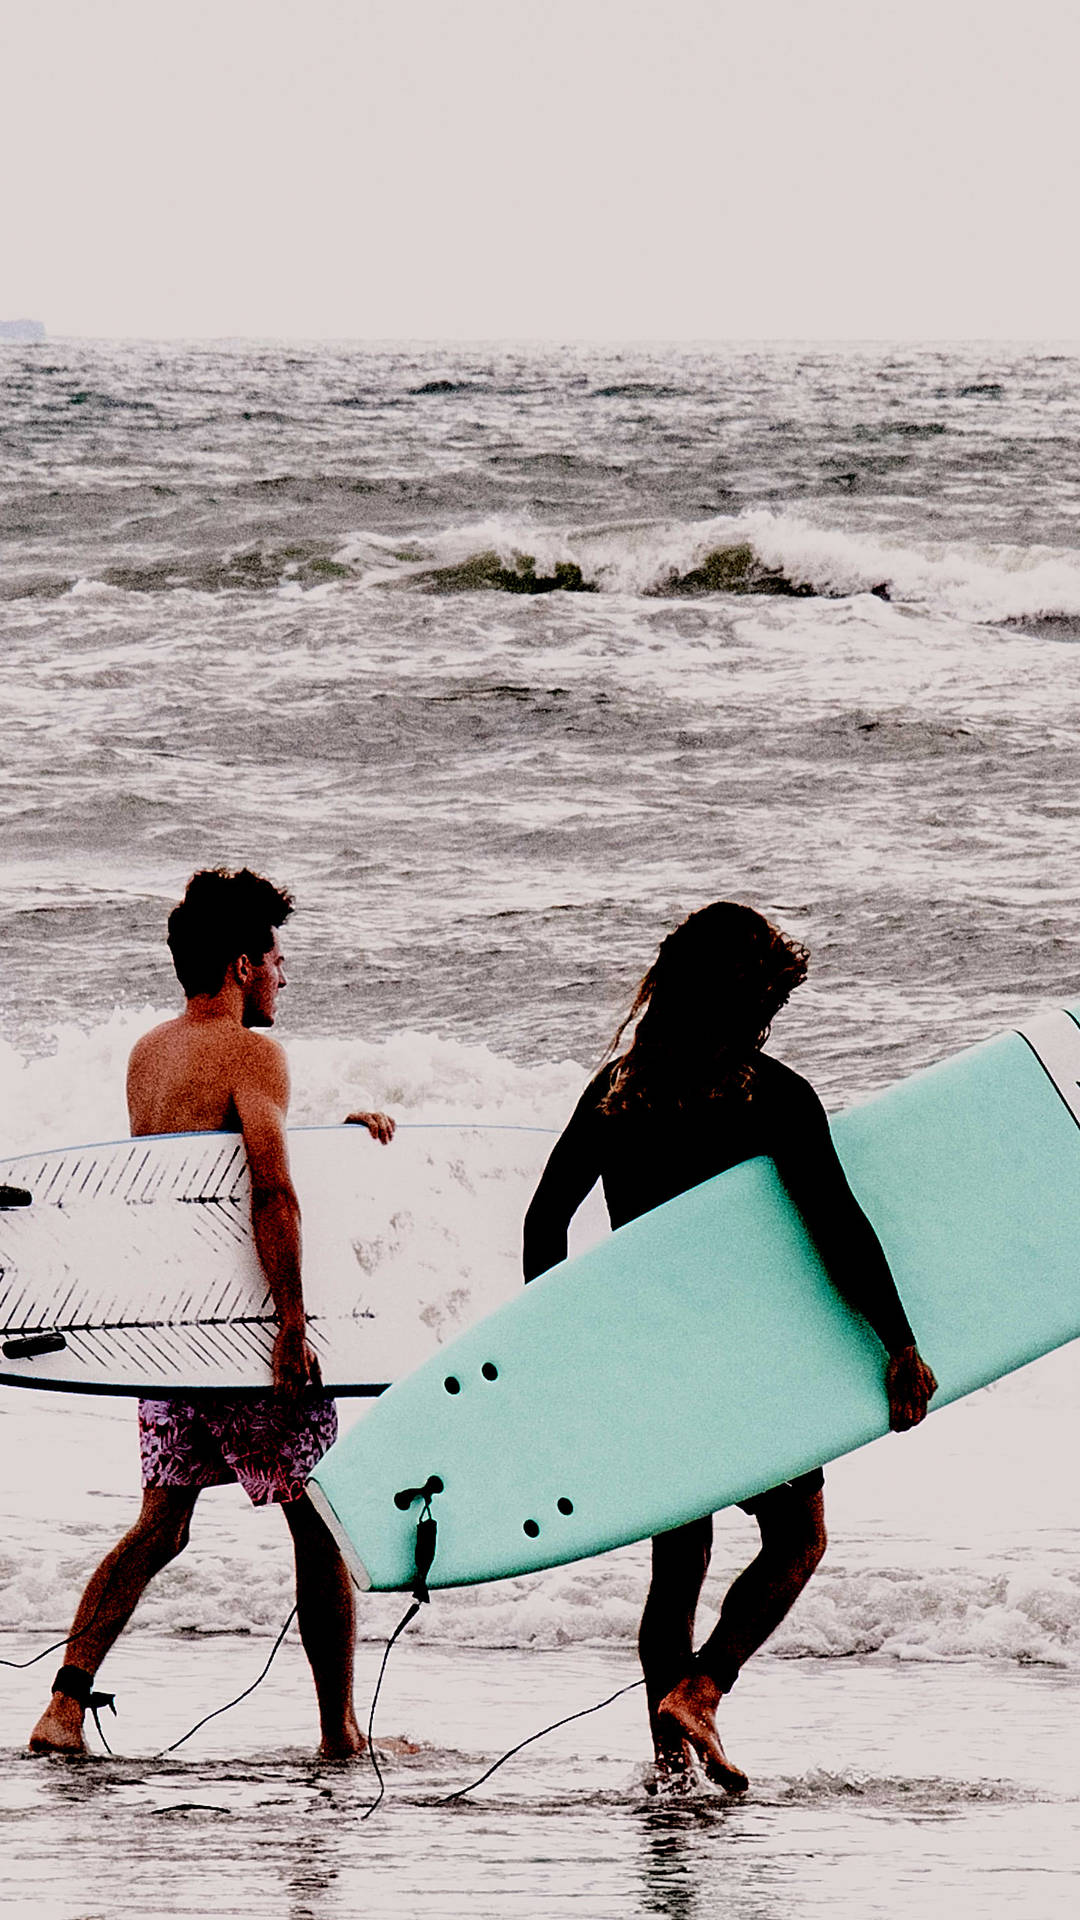 Two Friends Going Surfing